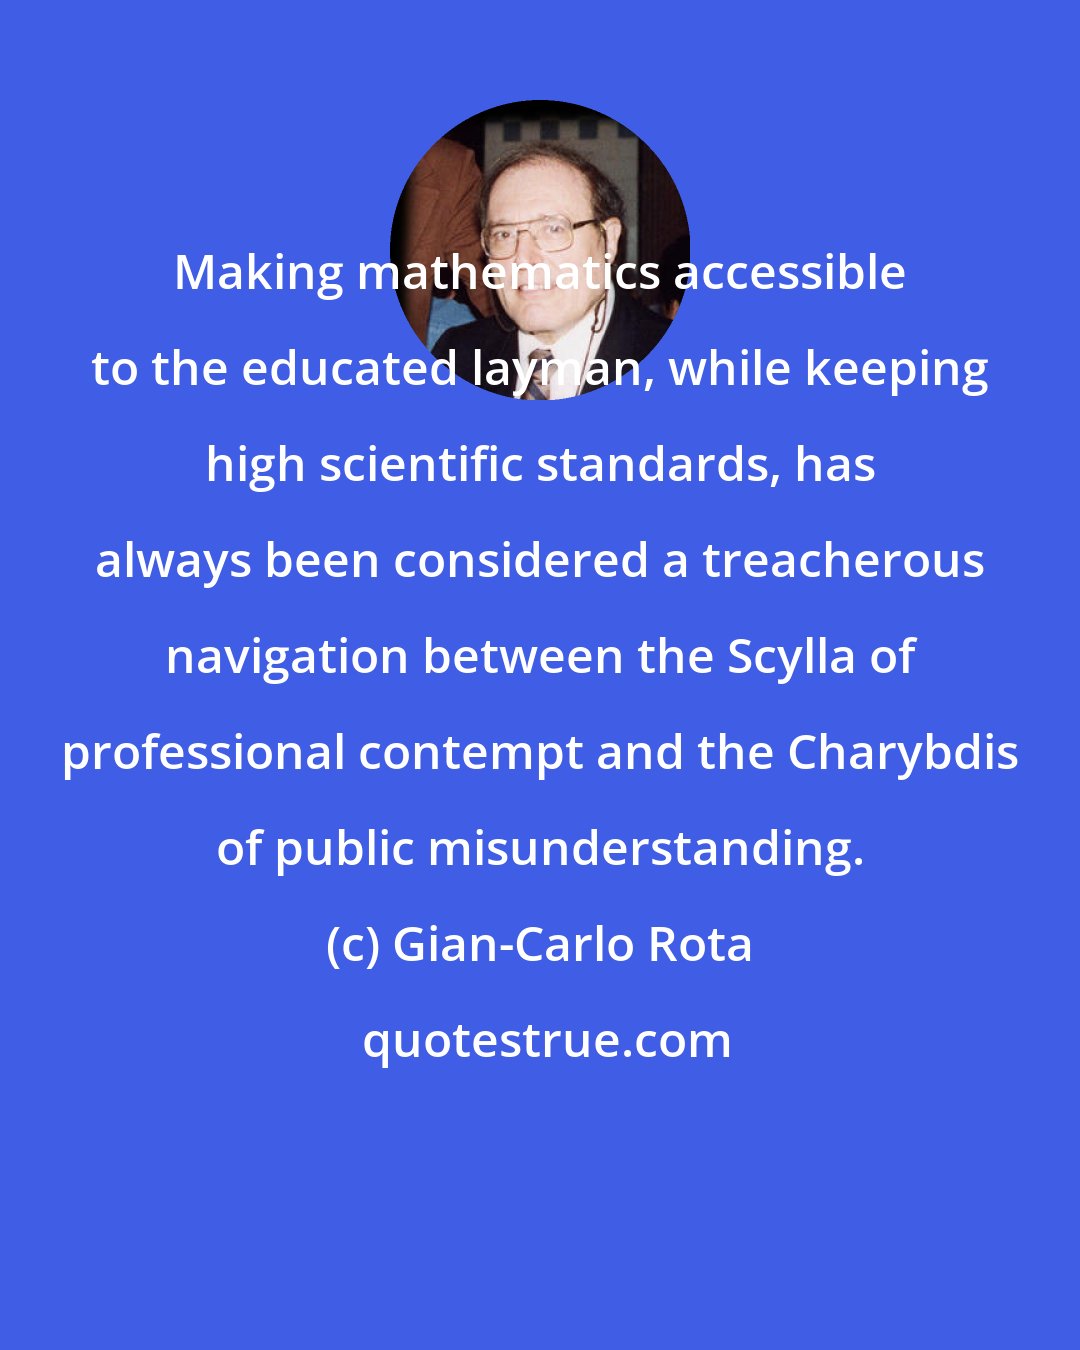 Gian-Carlo Rota: Making mathematics accessible to the educated layman, while keeping high scientific standards, has always been considered a treacherous navigation between the Scylla of professional contempt and the Charybdis of public misunderstanding.